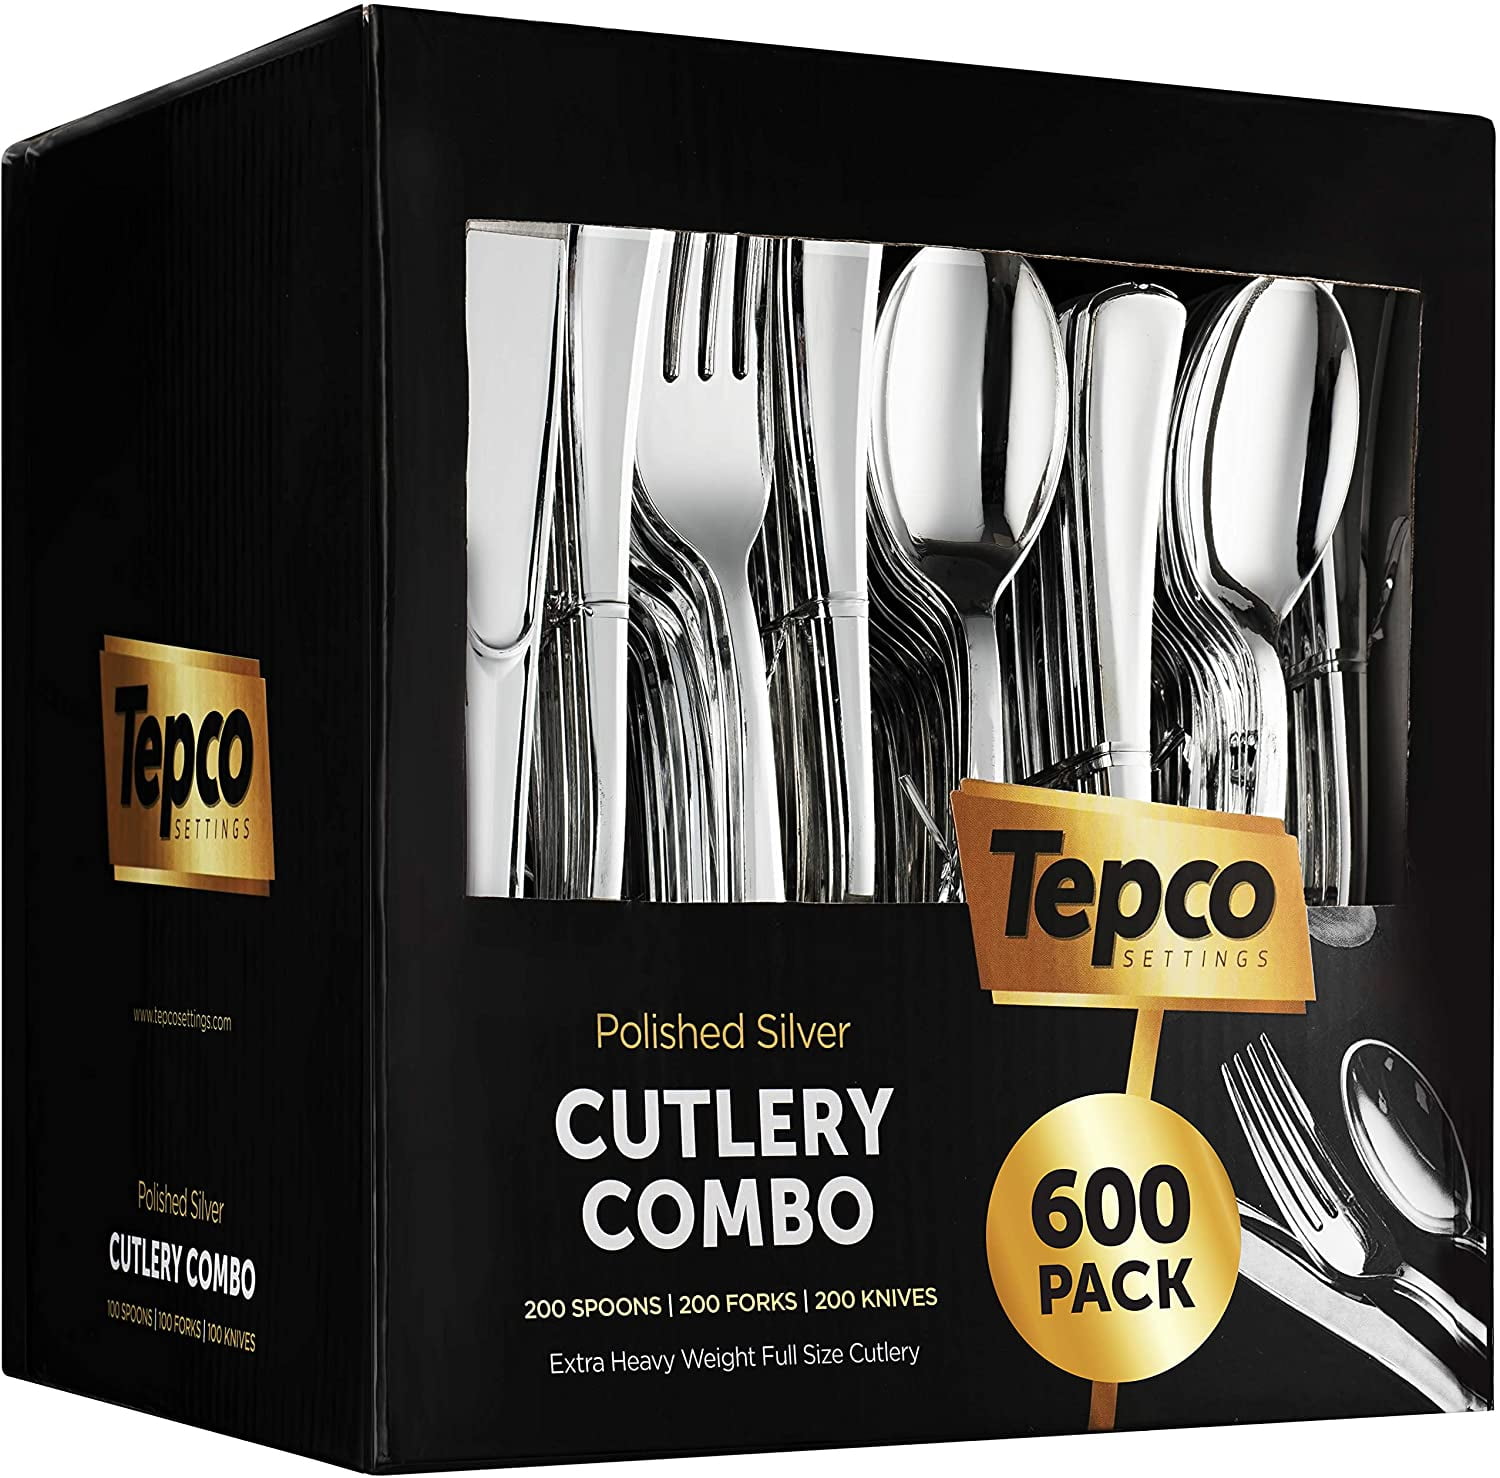 200 Forks 200 Knives and 200 Spoons 600 Piece Gold Plastic Silverware Set 